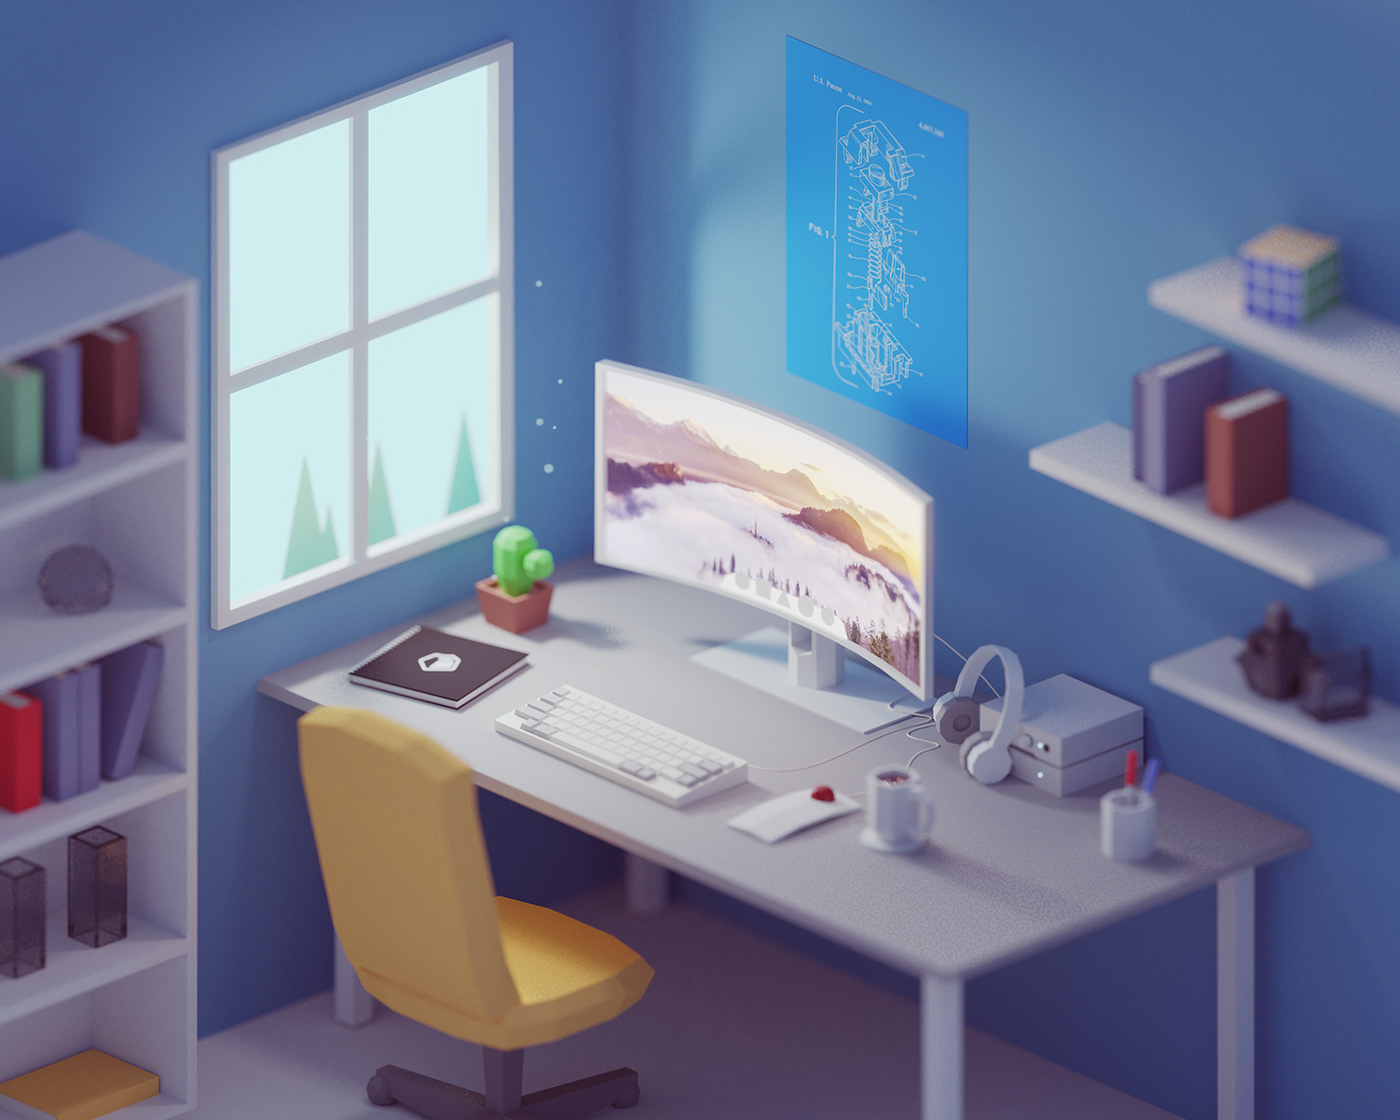 blender b3d Isometric poster Computer rig keyboard keyclack Low Poly